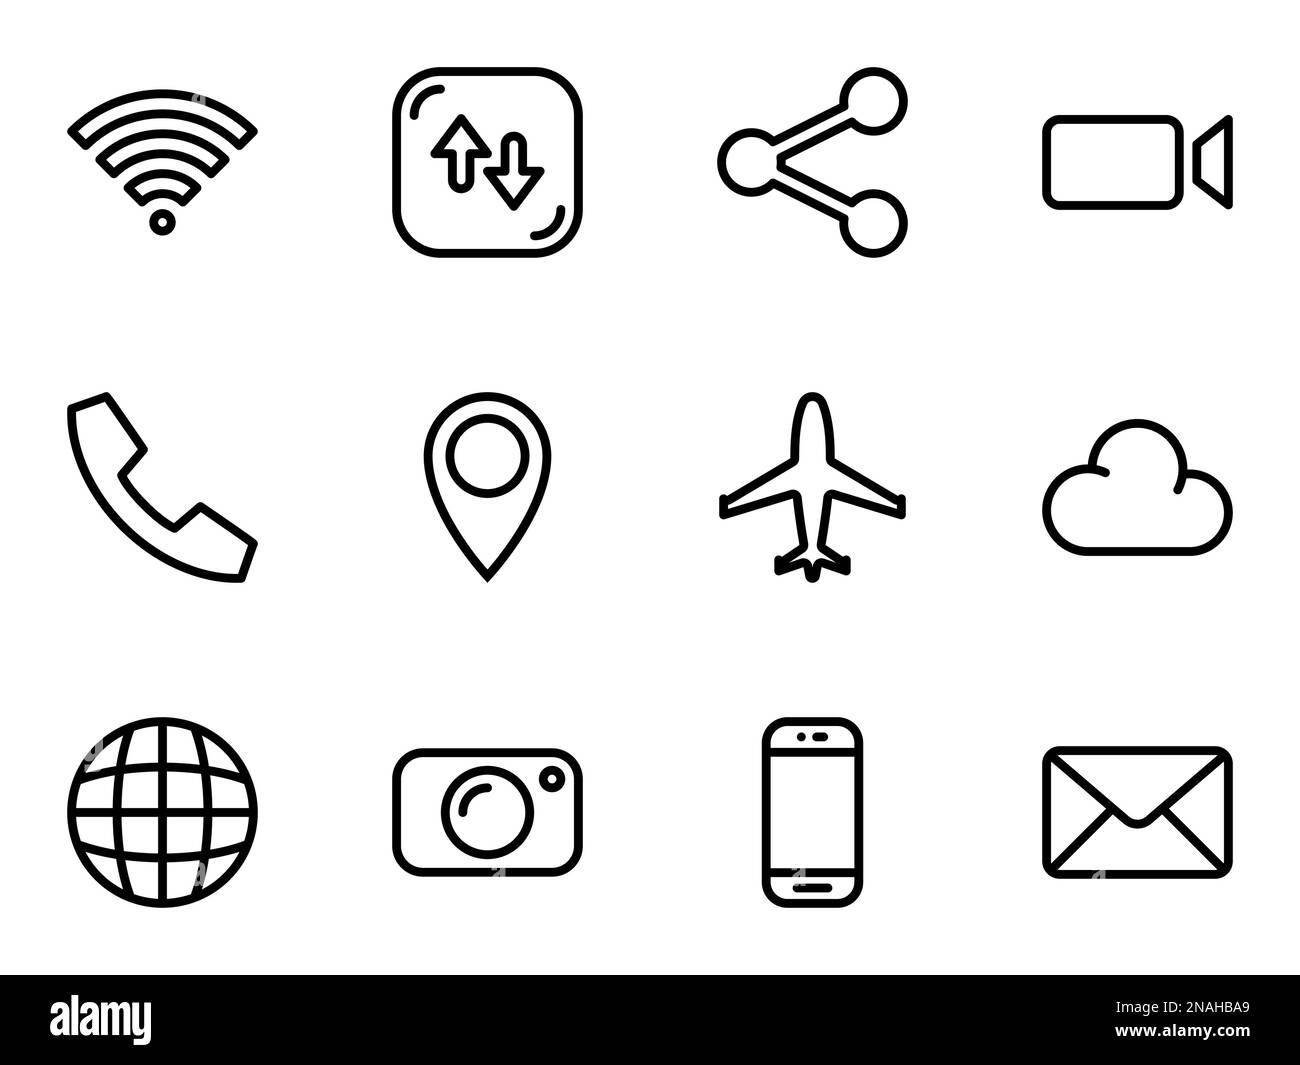 Simple vector icons. Flat illustration on a theme web icons for computer, phone, tablet, laptop Stock Vector